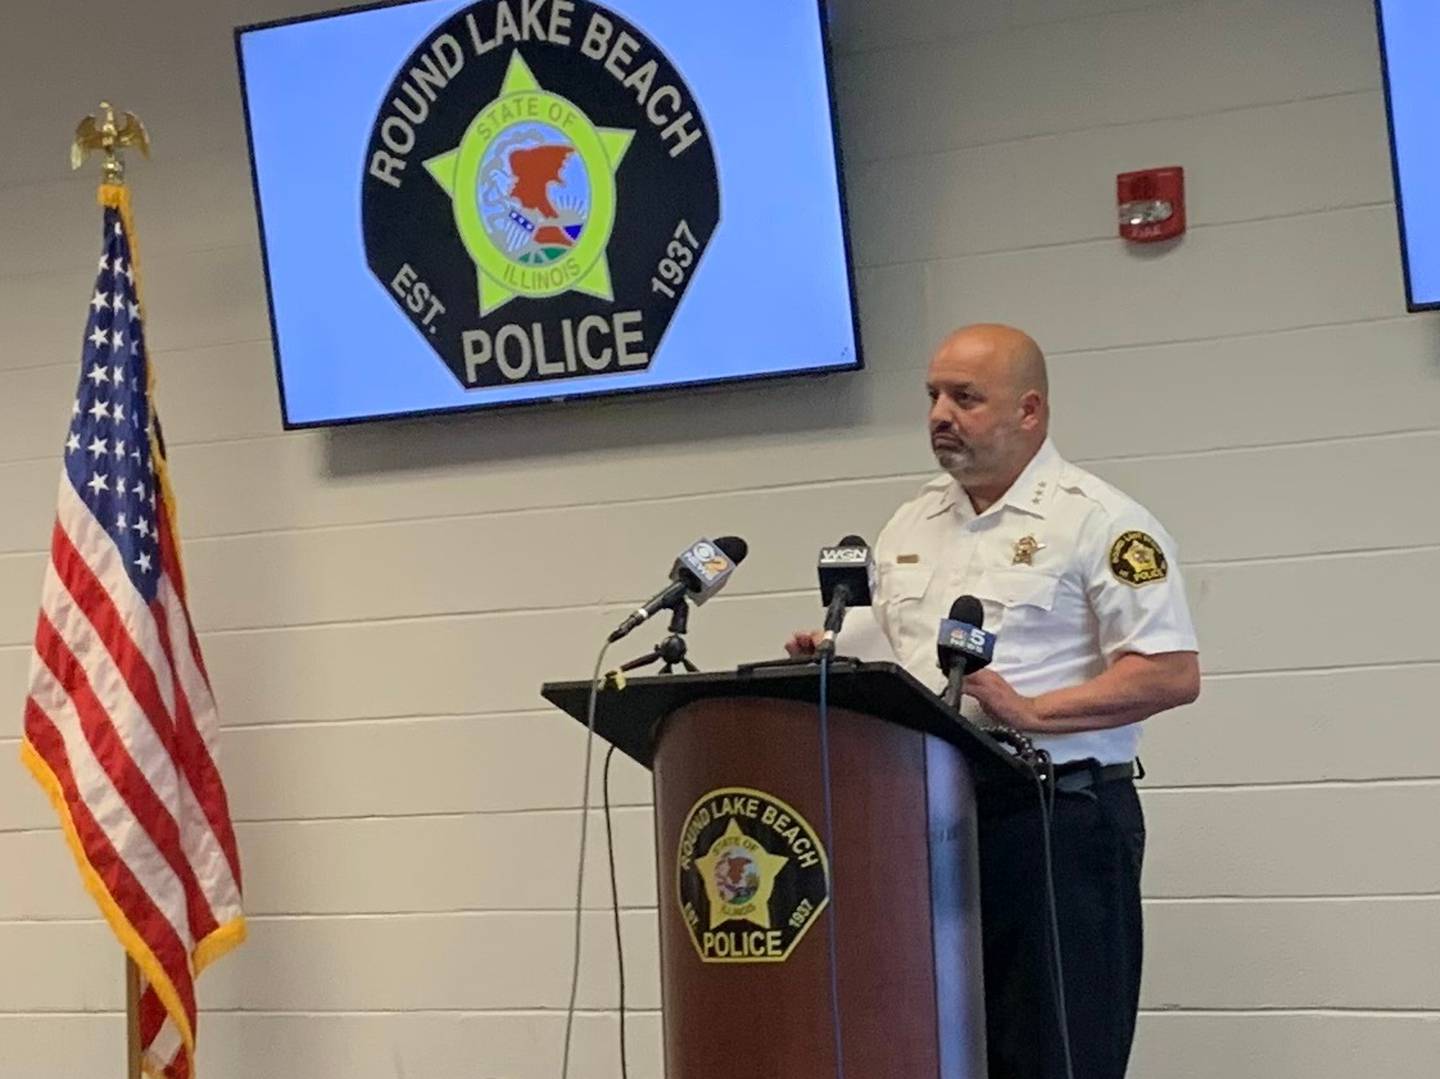 Round Lake Beach Police Chief Gilbert Rivera speaks at a news conference on June 14, 2022, at the Round Lake Beach Police Department.